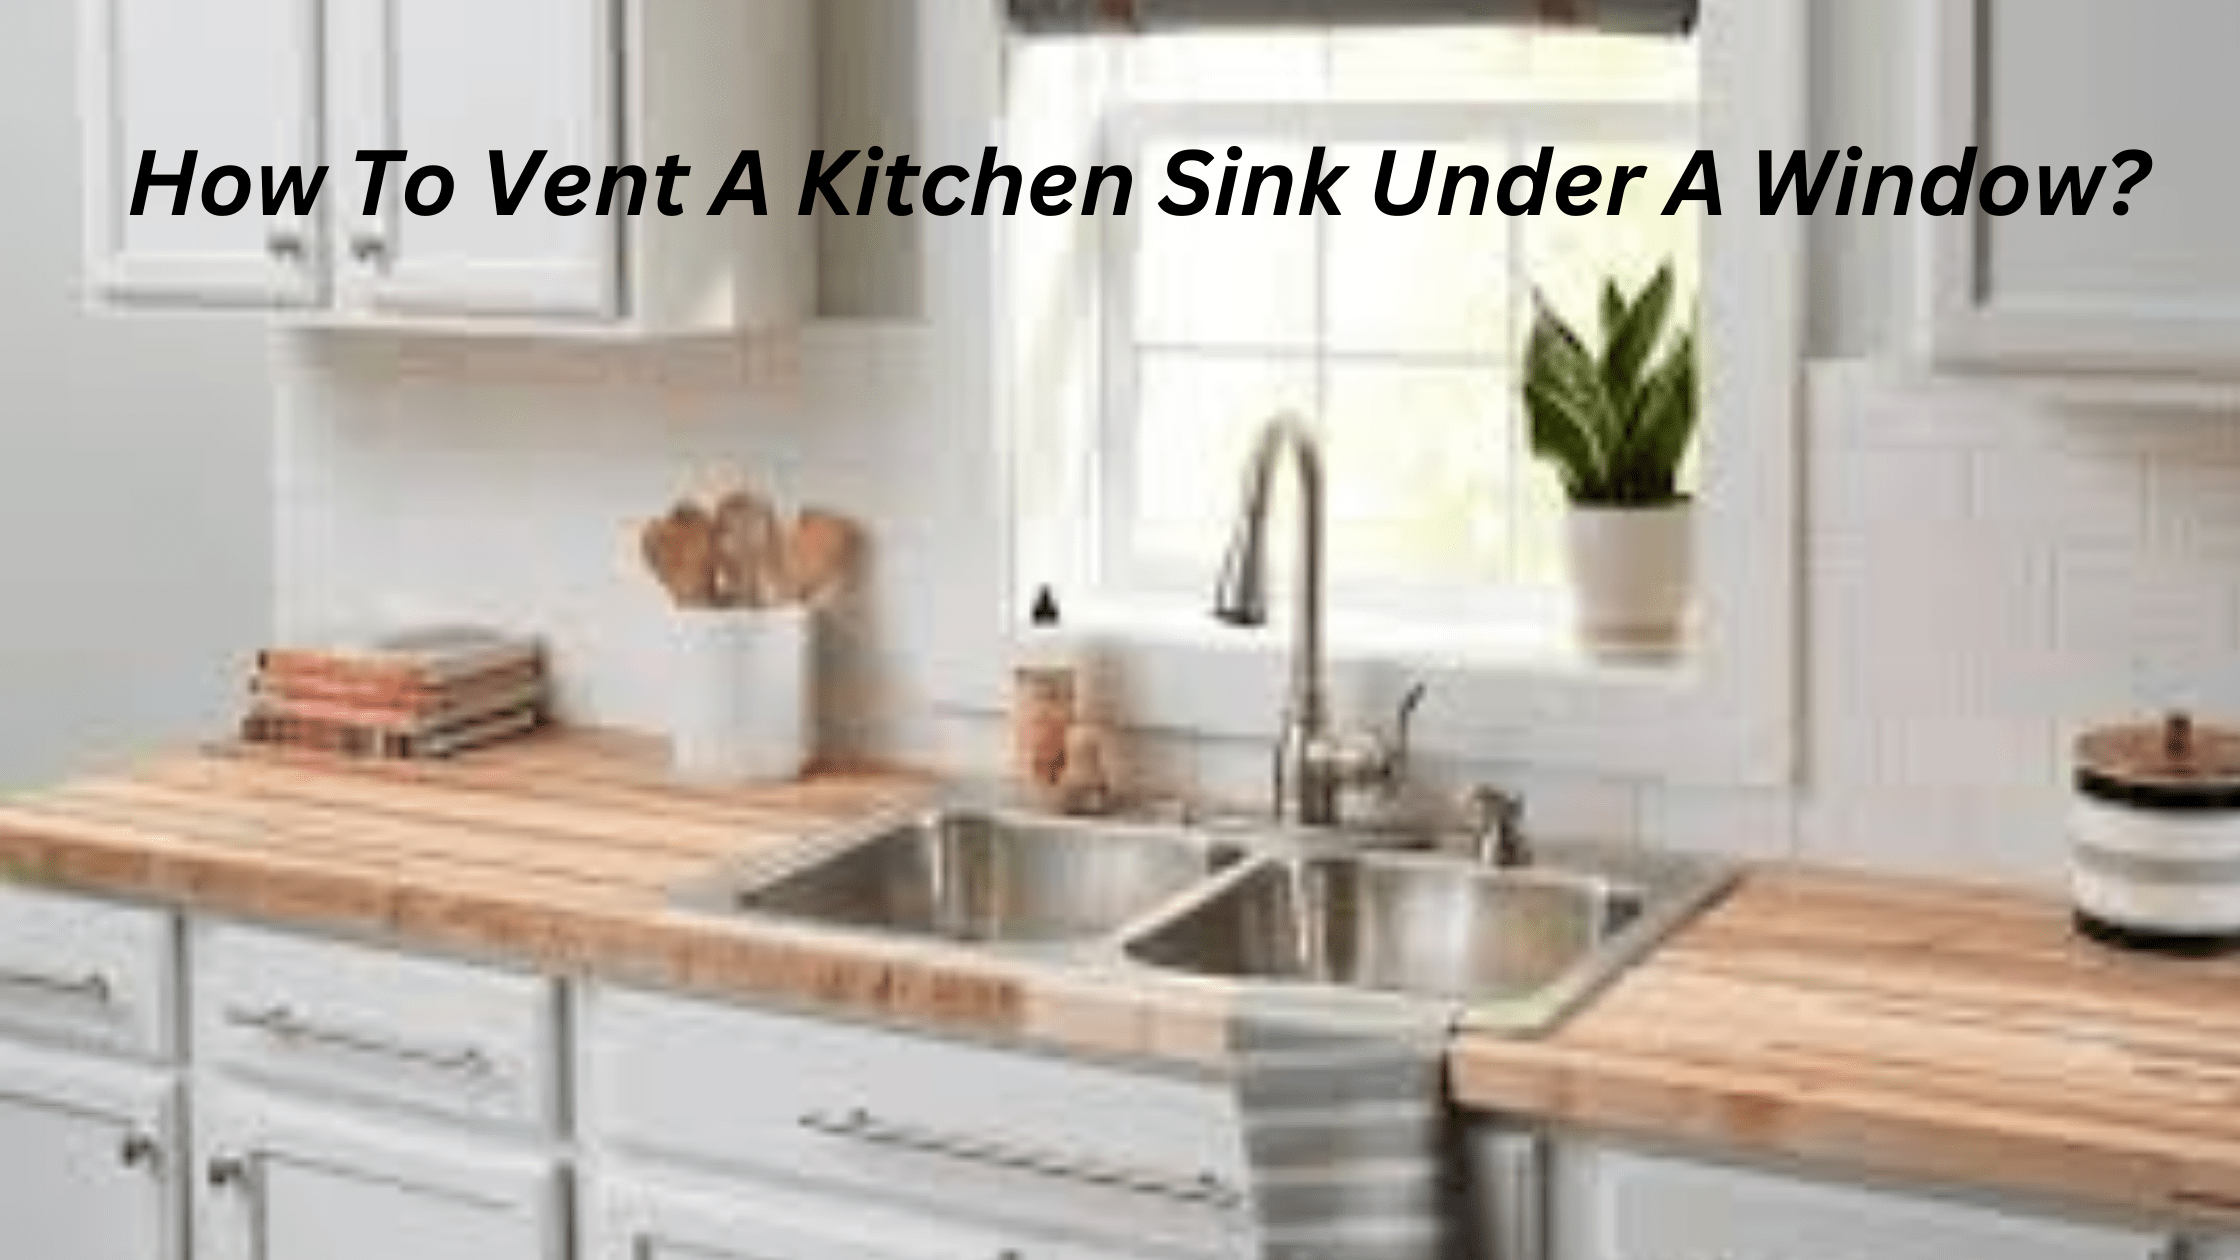 How To Vent A Kitchen Sink Under A Window?